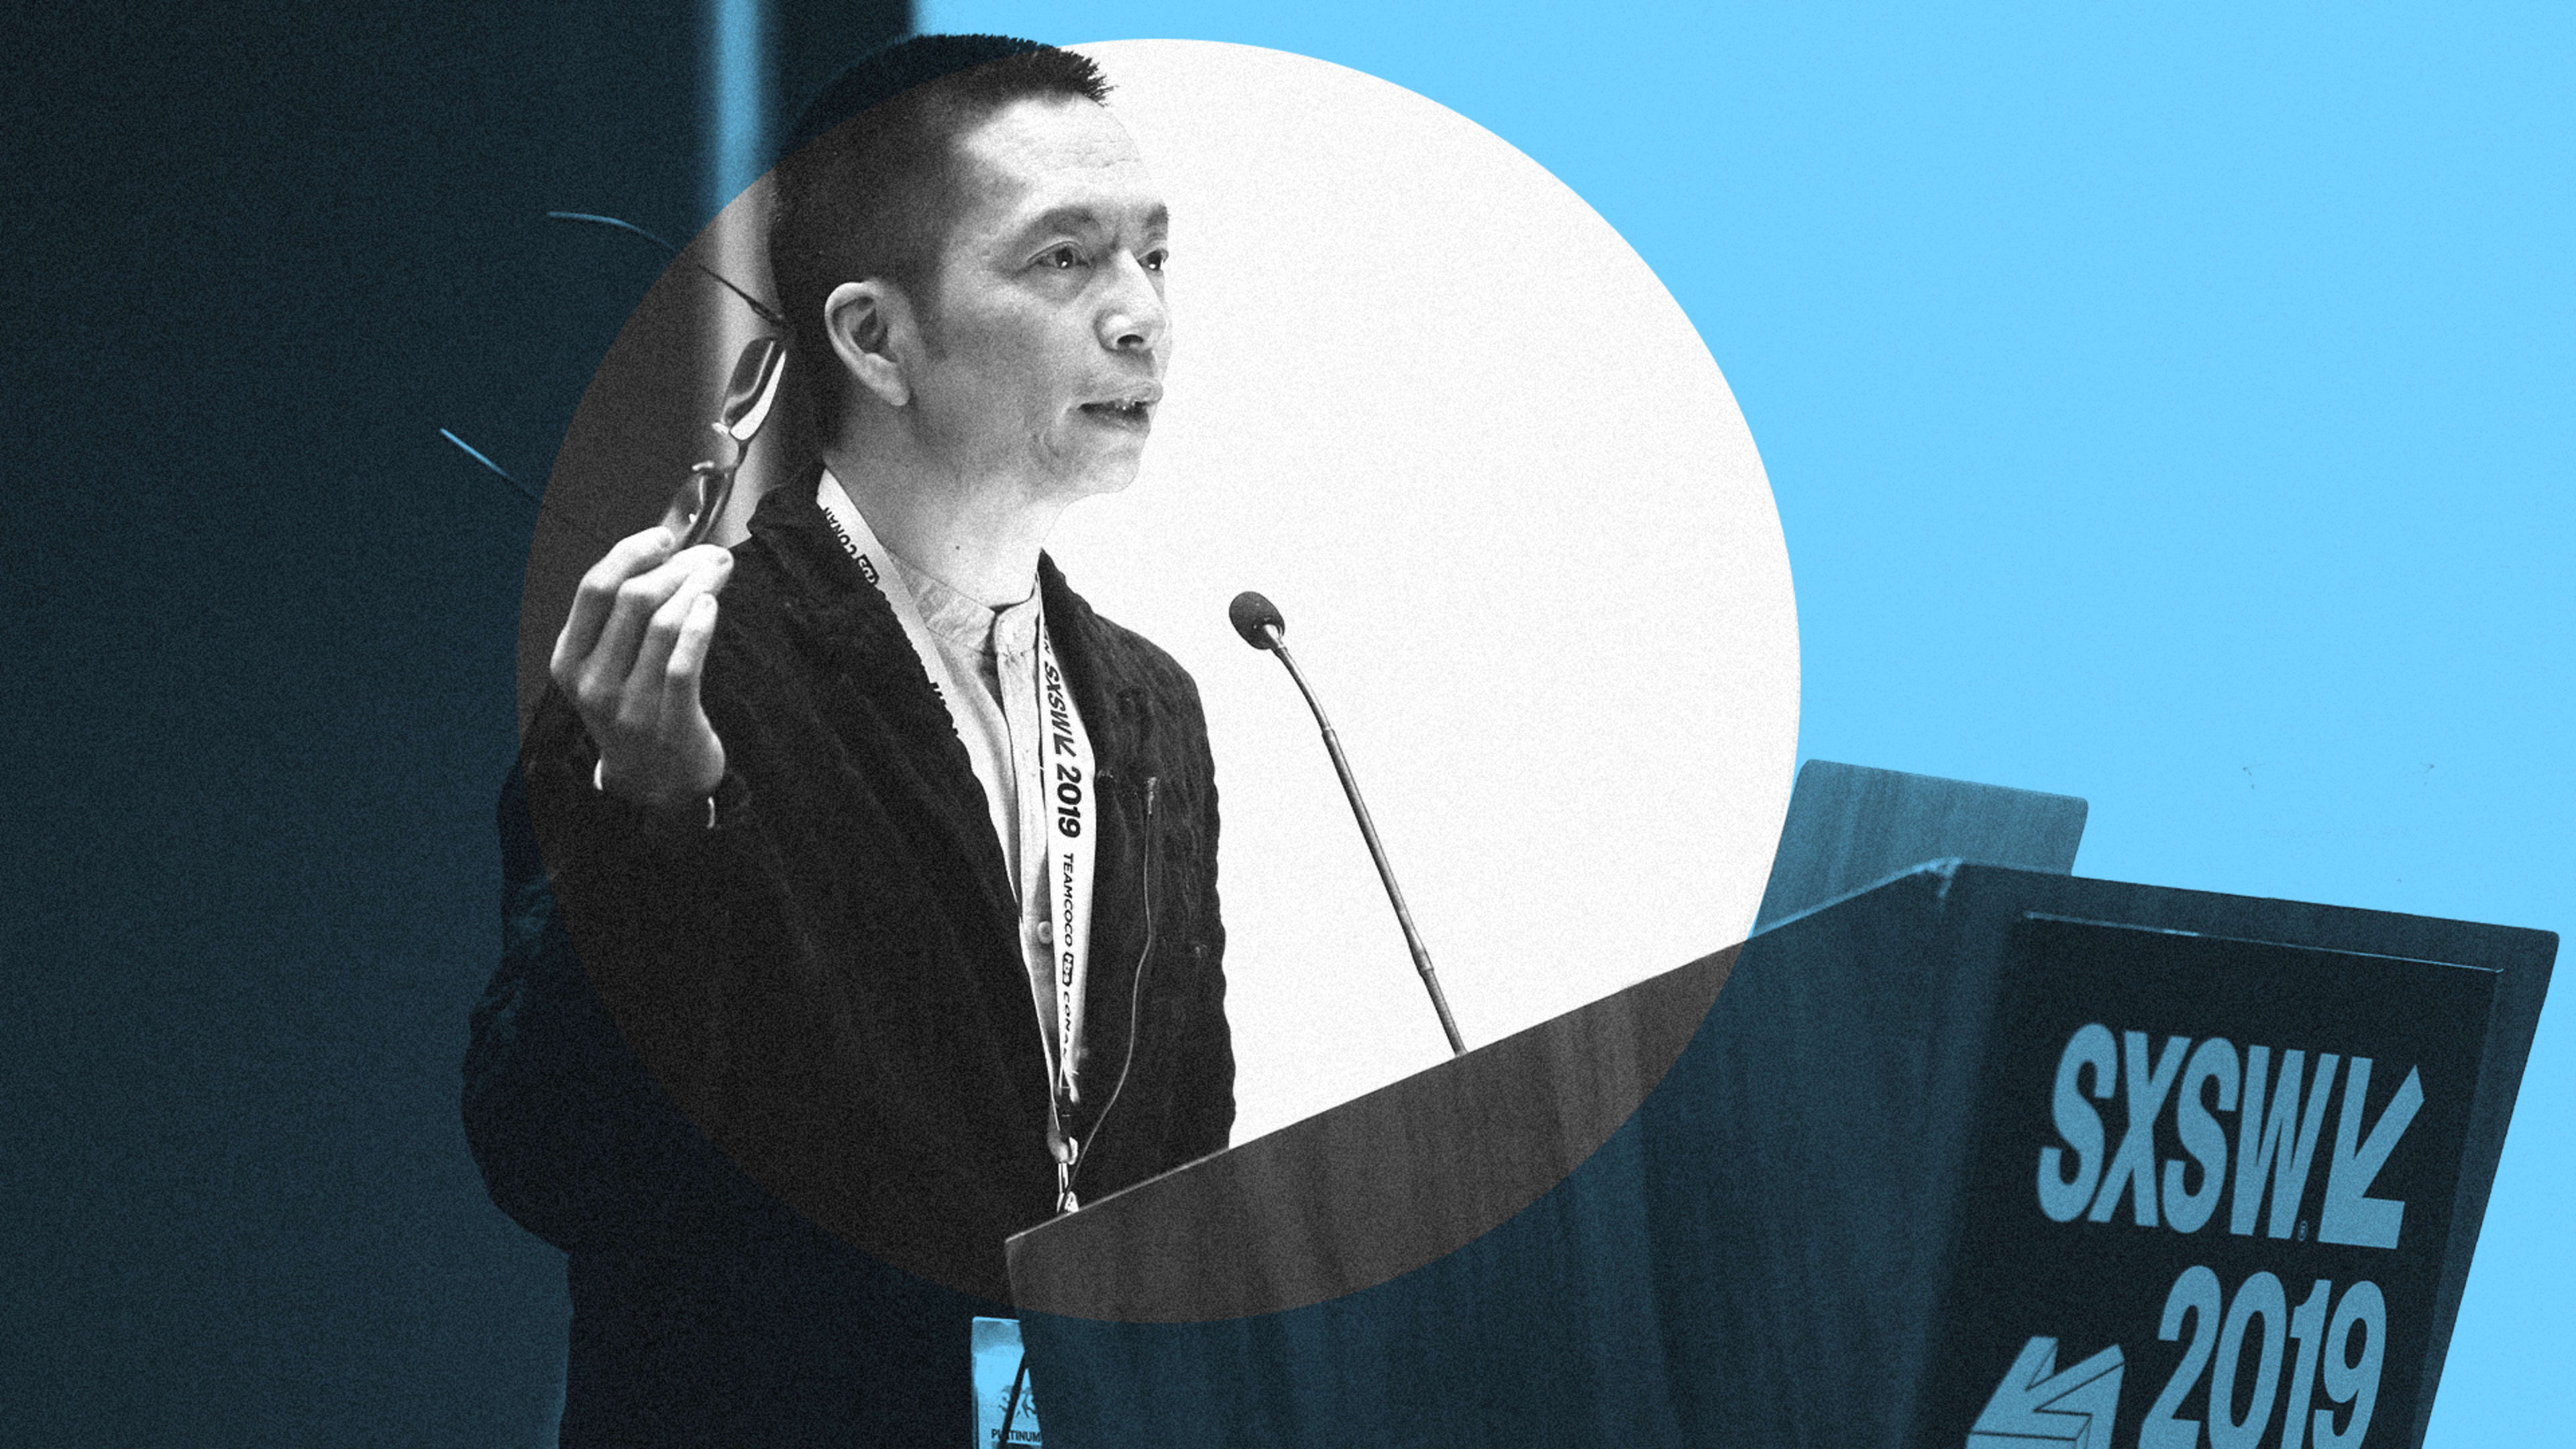 John Maeda: “In reality, design is not that important”